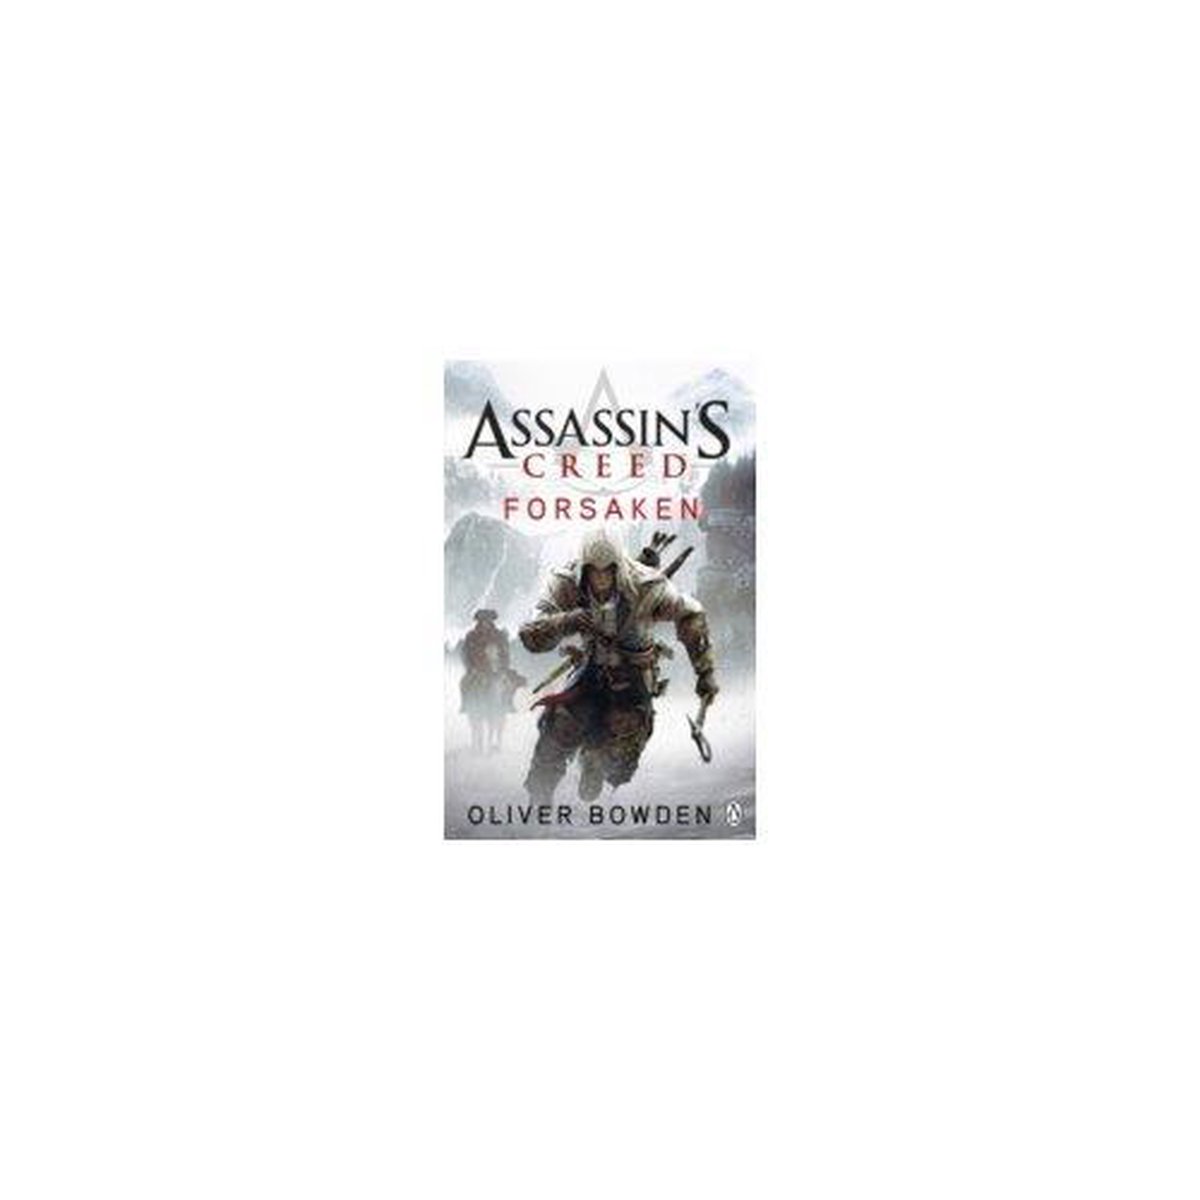 Assassins Creed New Book 2012 - Oliver Bowden